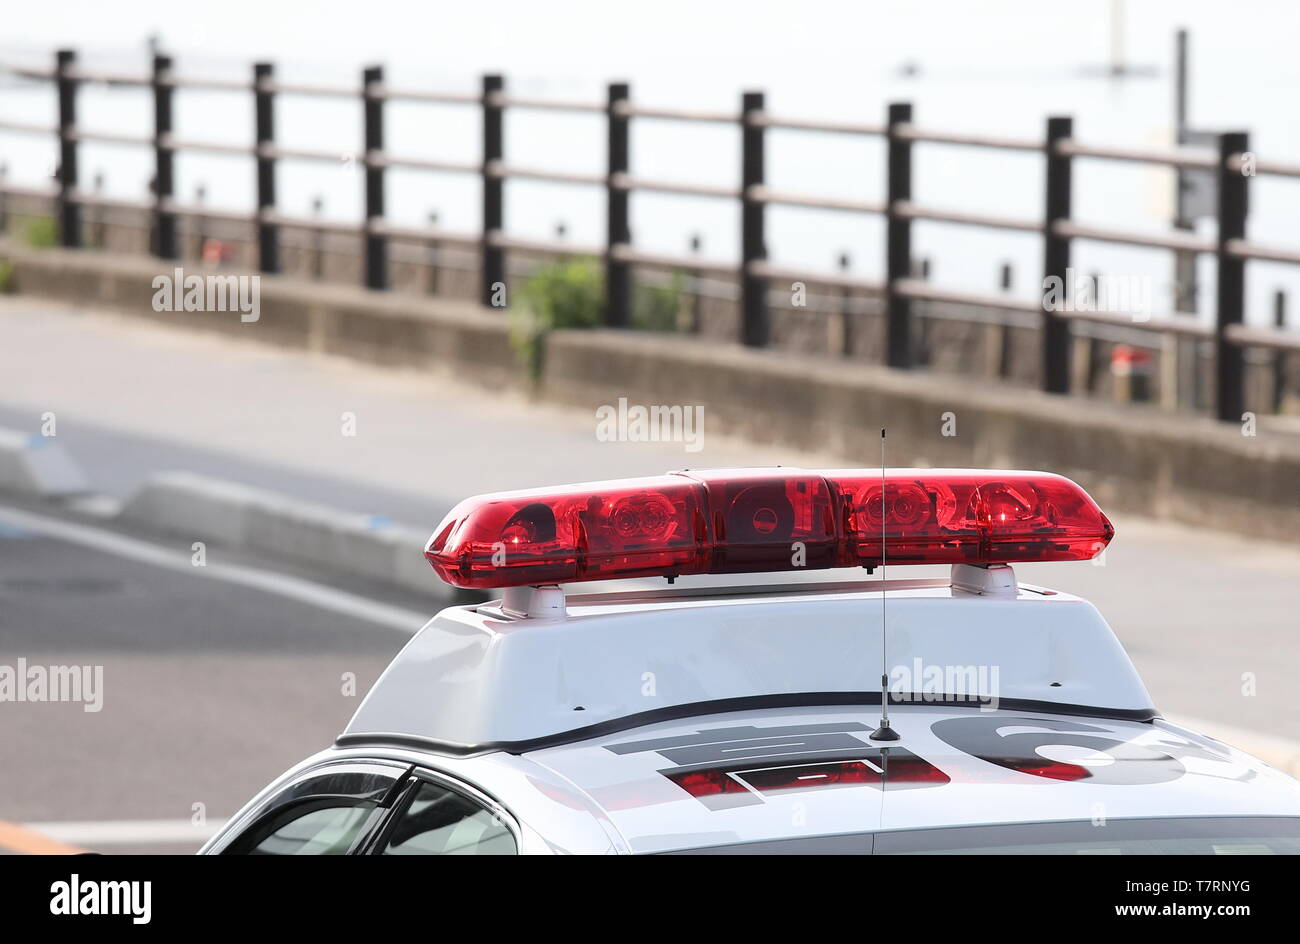 Japanese police car with red light Japan Stock Photo